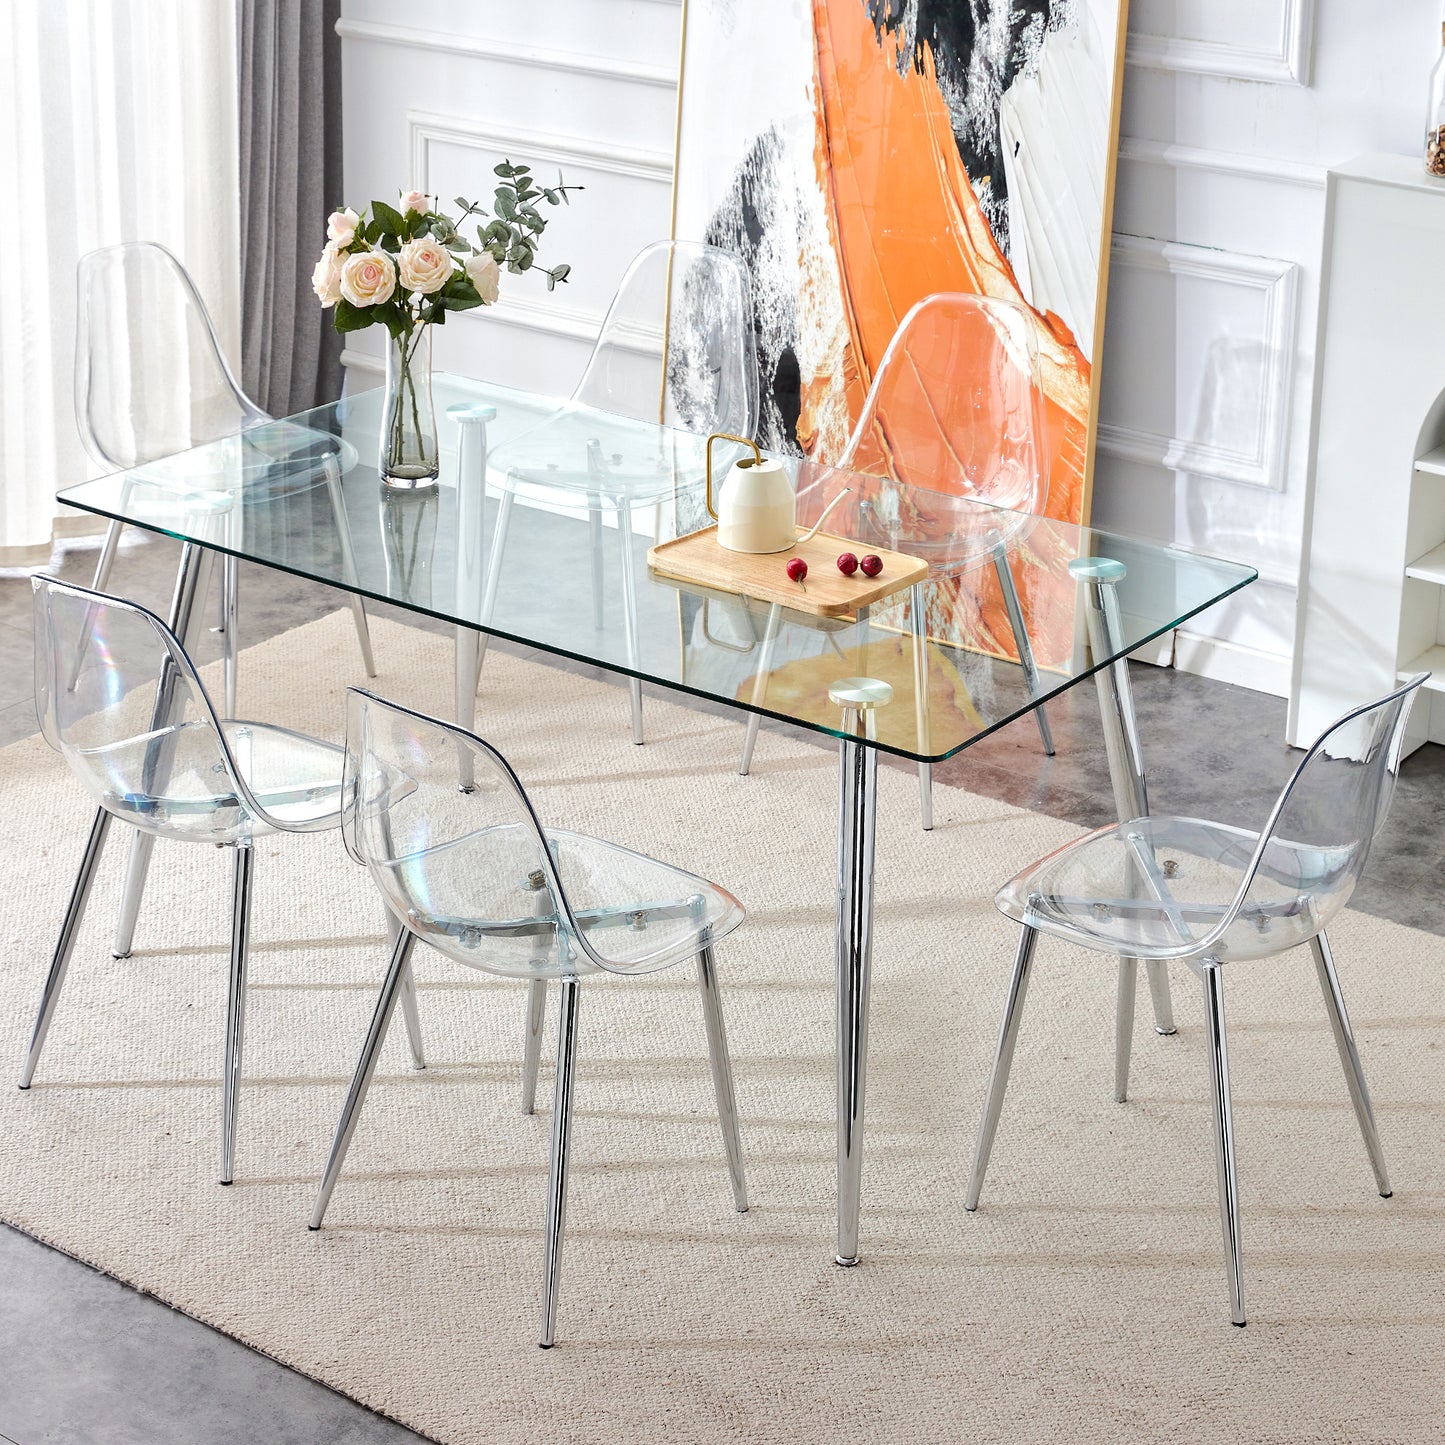 Modern minimalist rectangular glass dining table, 0.4 inch thick transparent tempered glass tabletop and silver metal legs, suitable for kitchens, restaurants, and living rooms 63"*35.4"*30"DT-1544